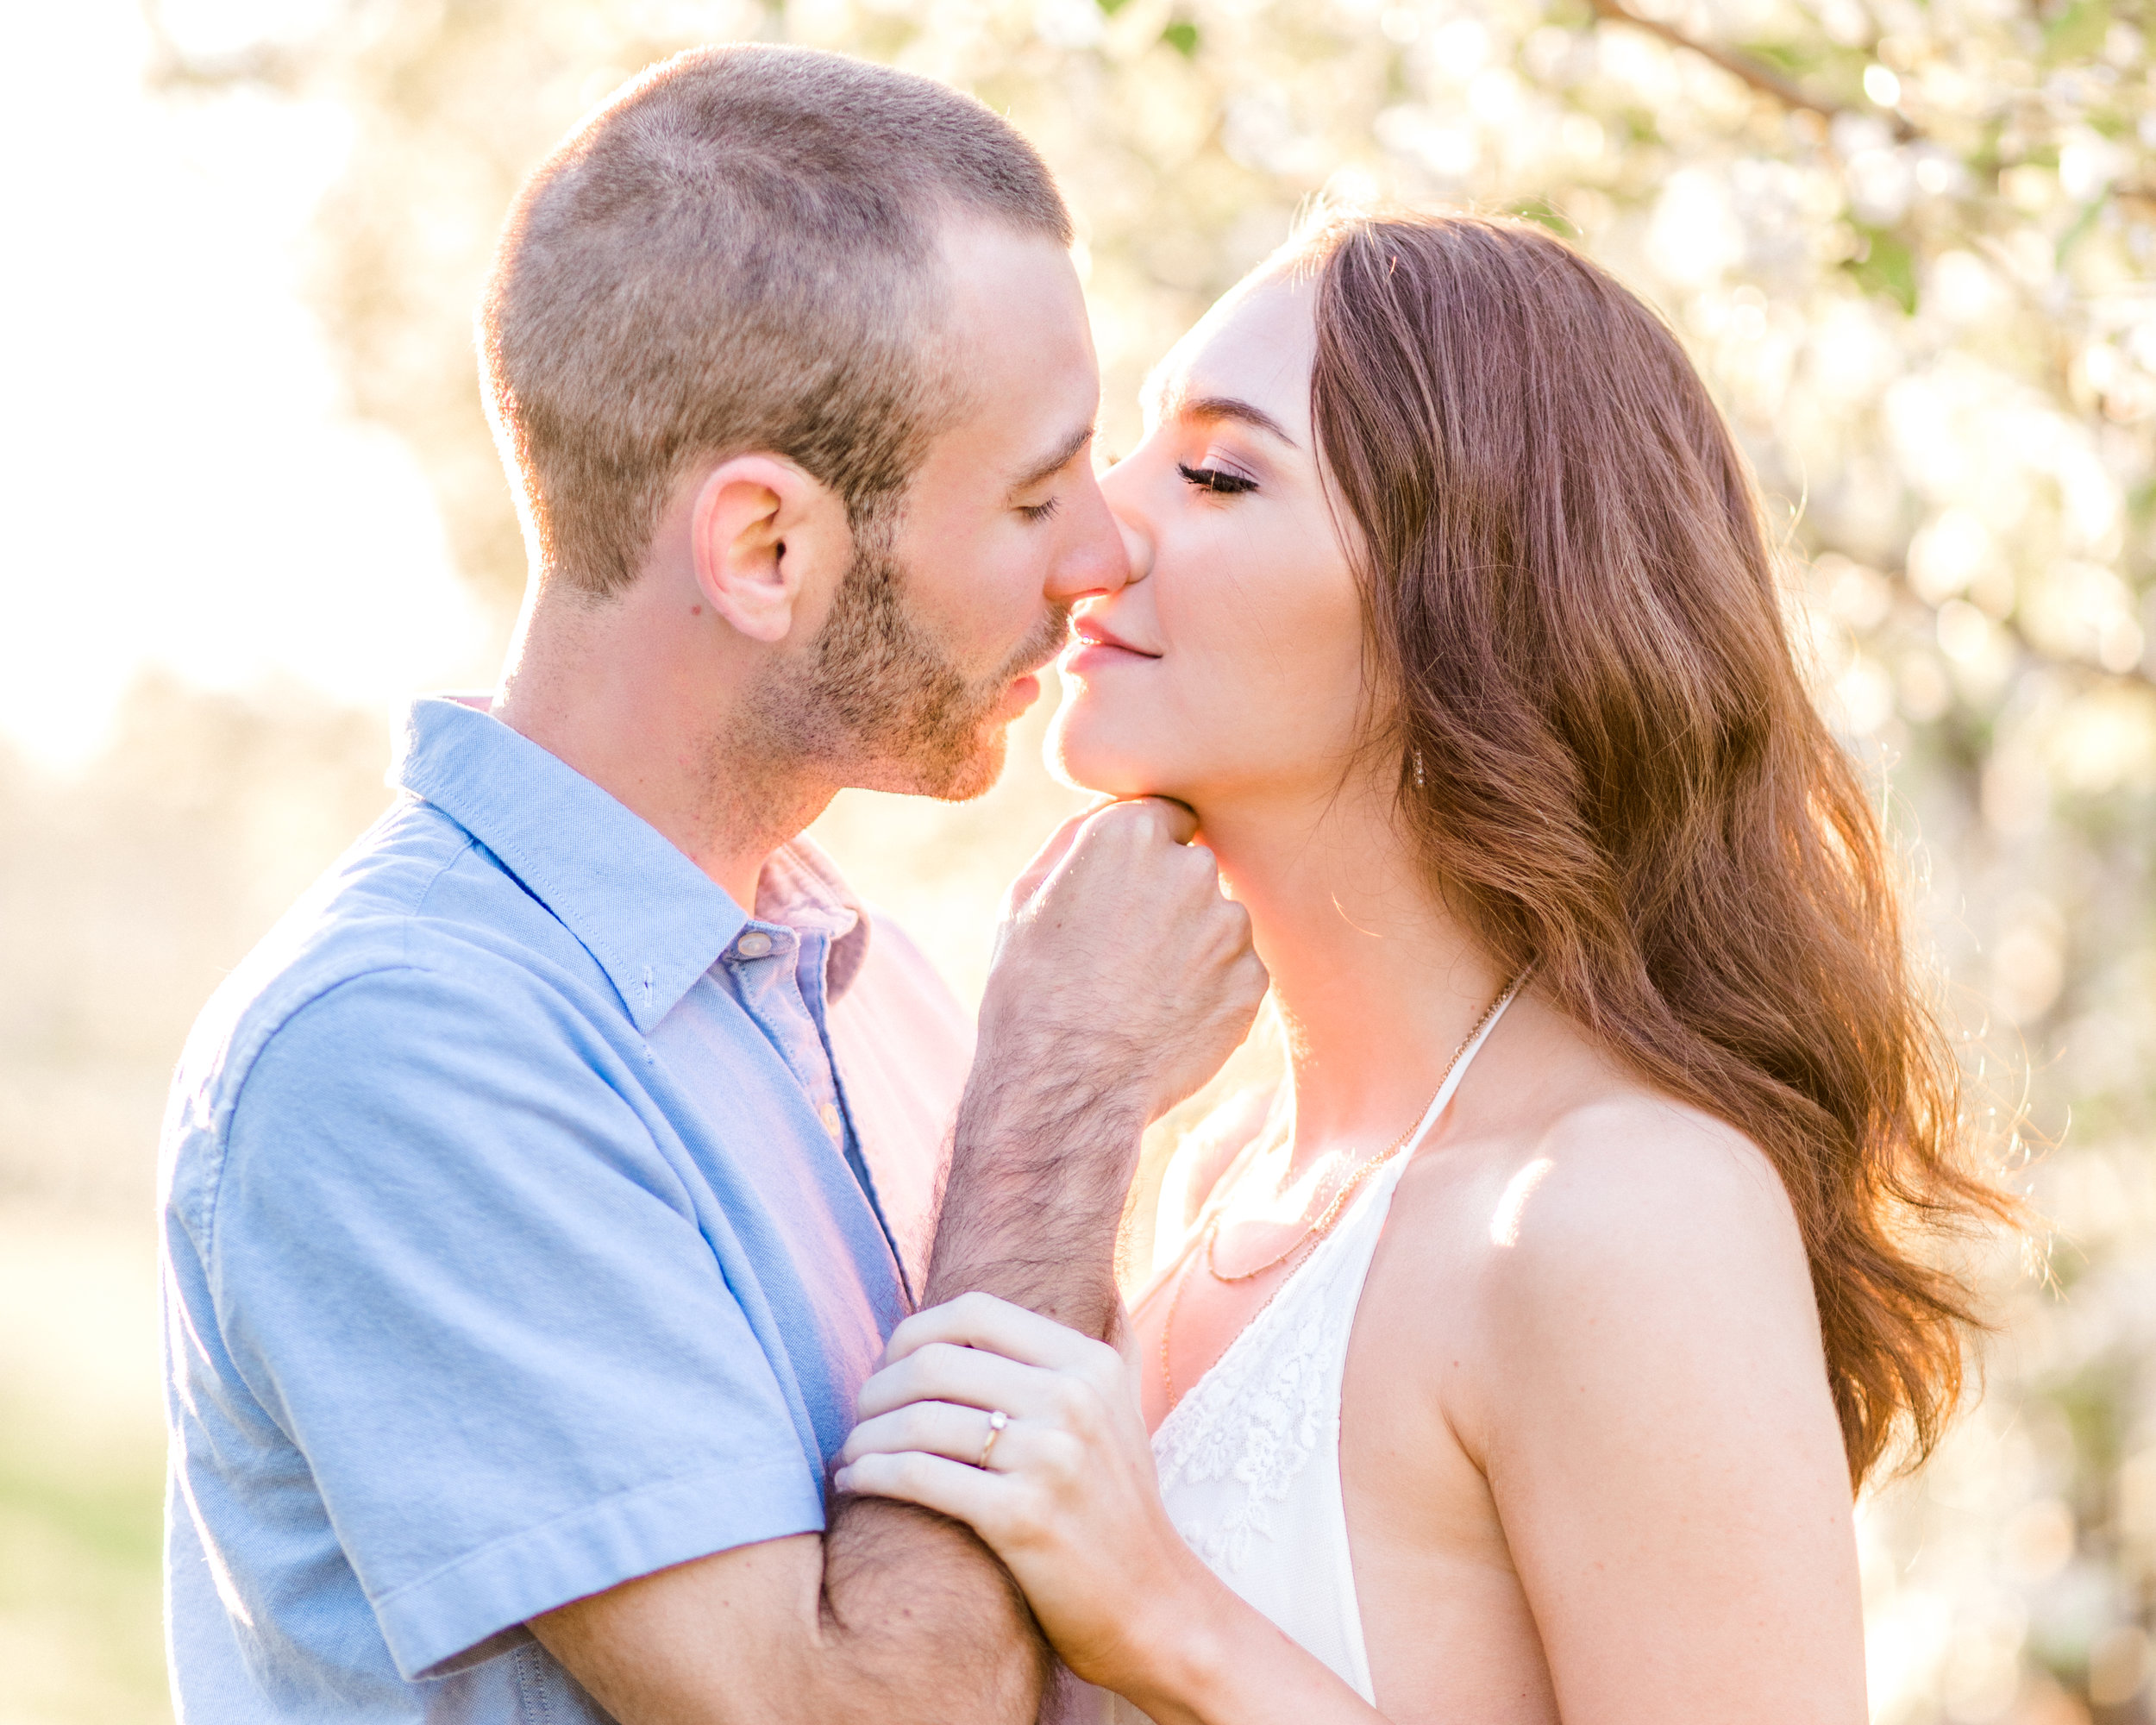 Springtime engagement pictures should be romantic and fun! This golden glow session was jus that. Sunrise orchard engagement photo ideas with flower blossoms.